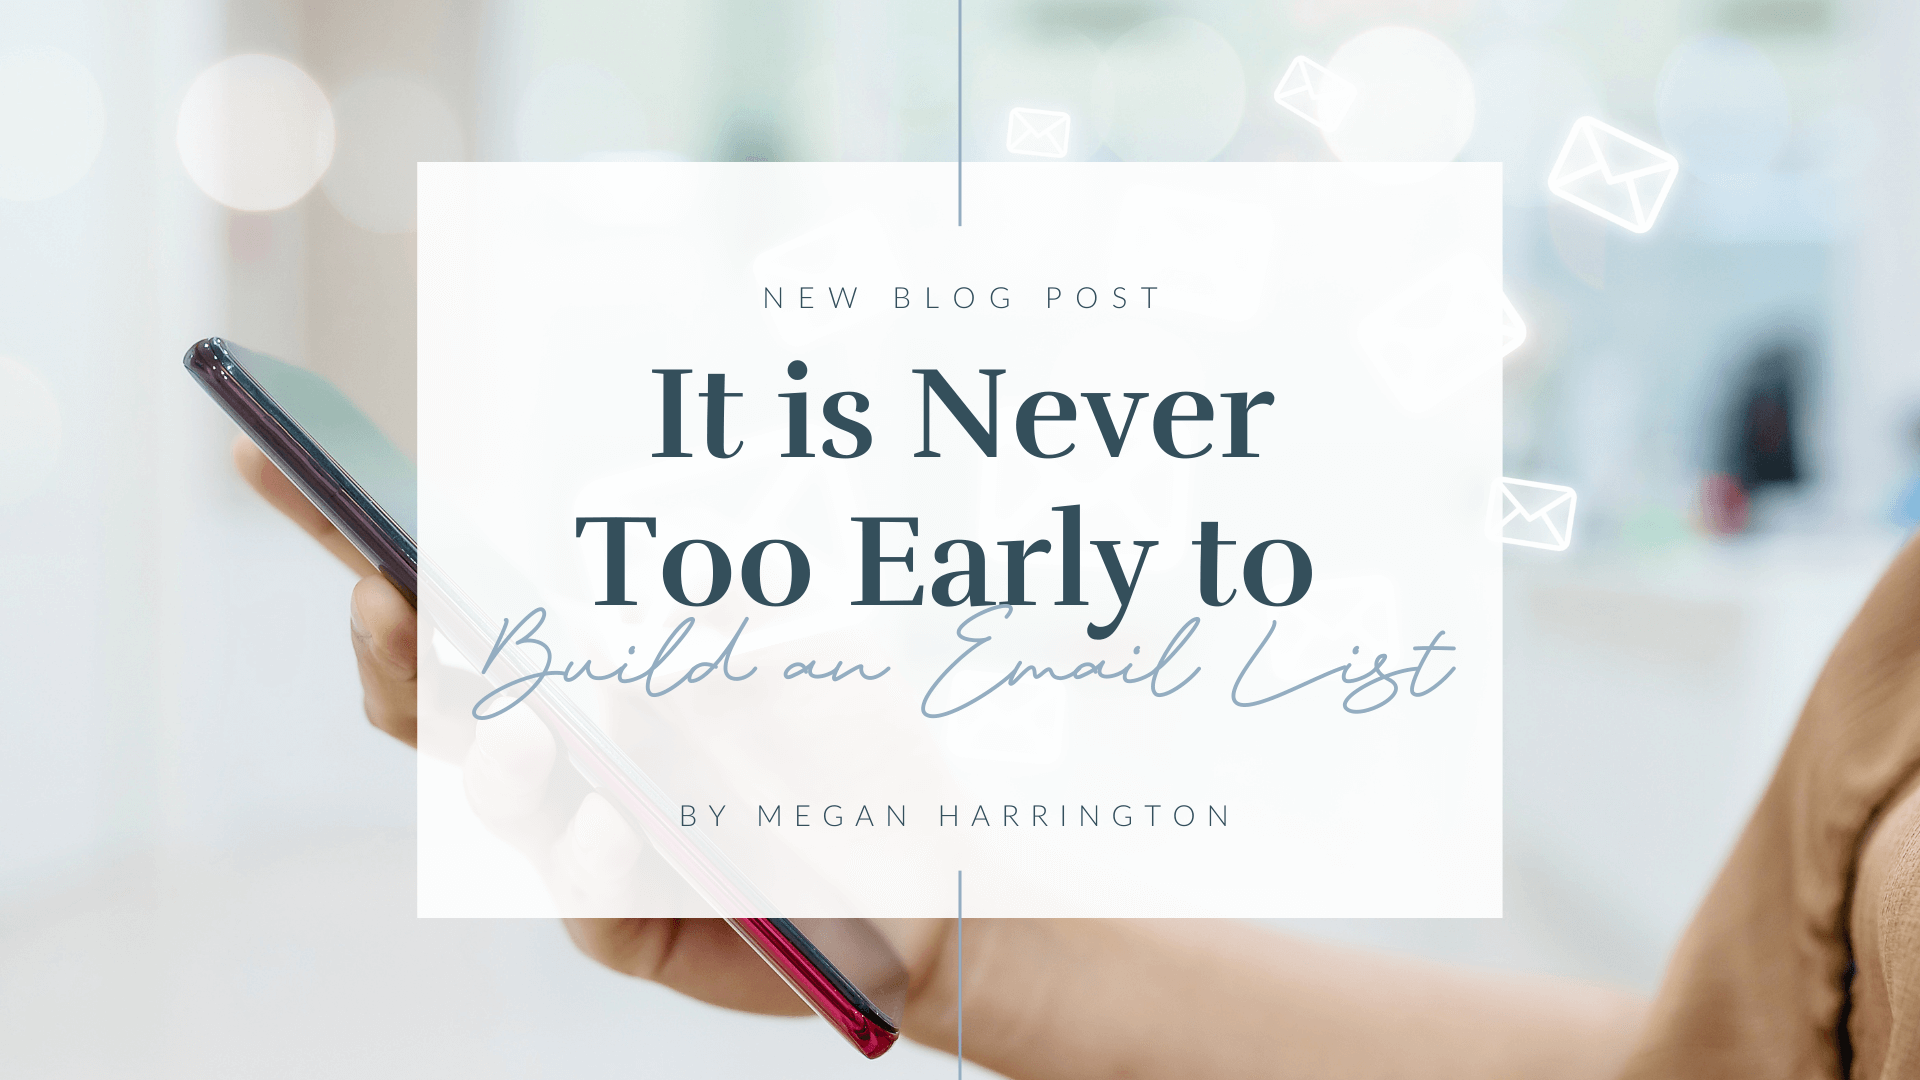 It’s Never Too Early to Build an Email List